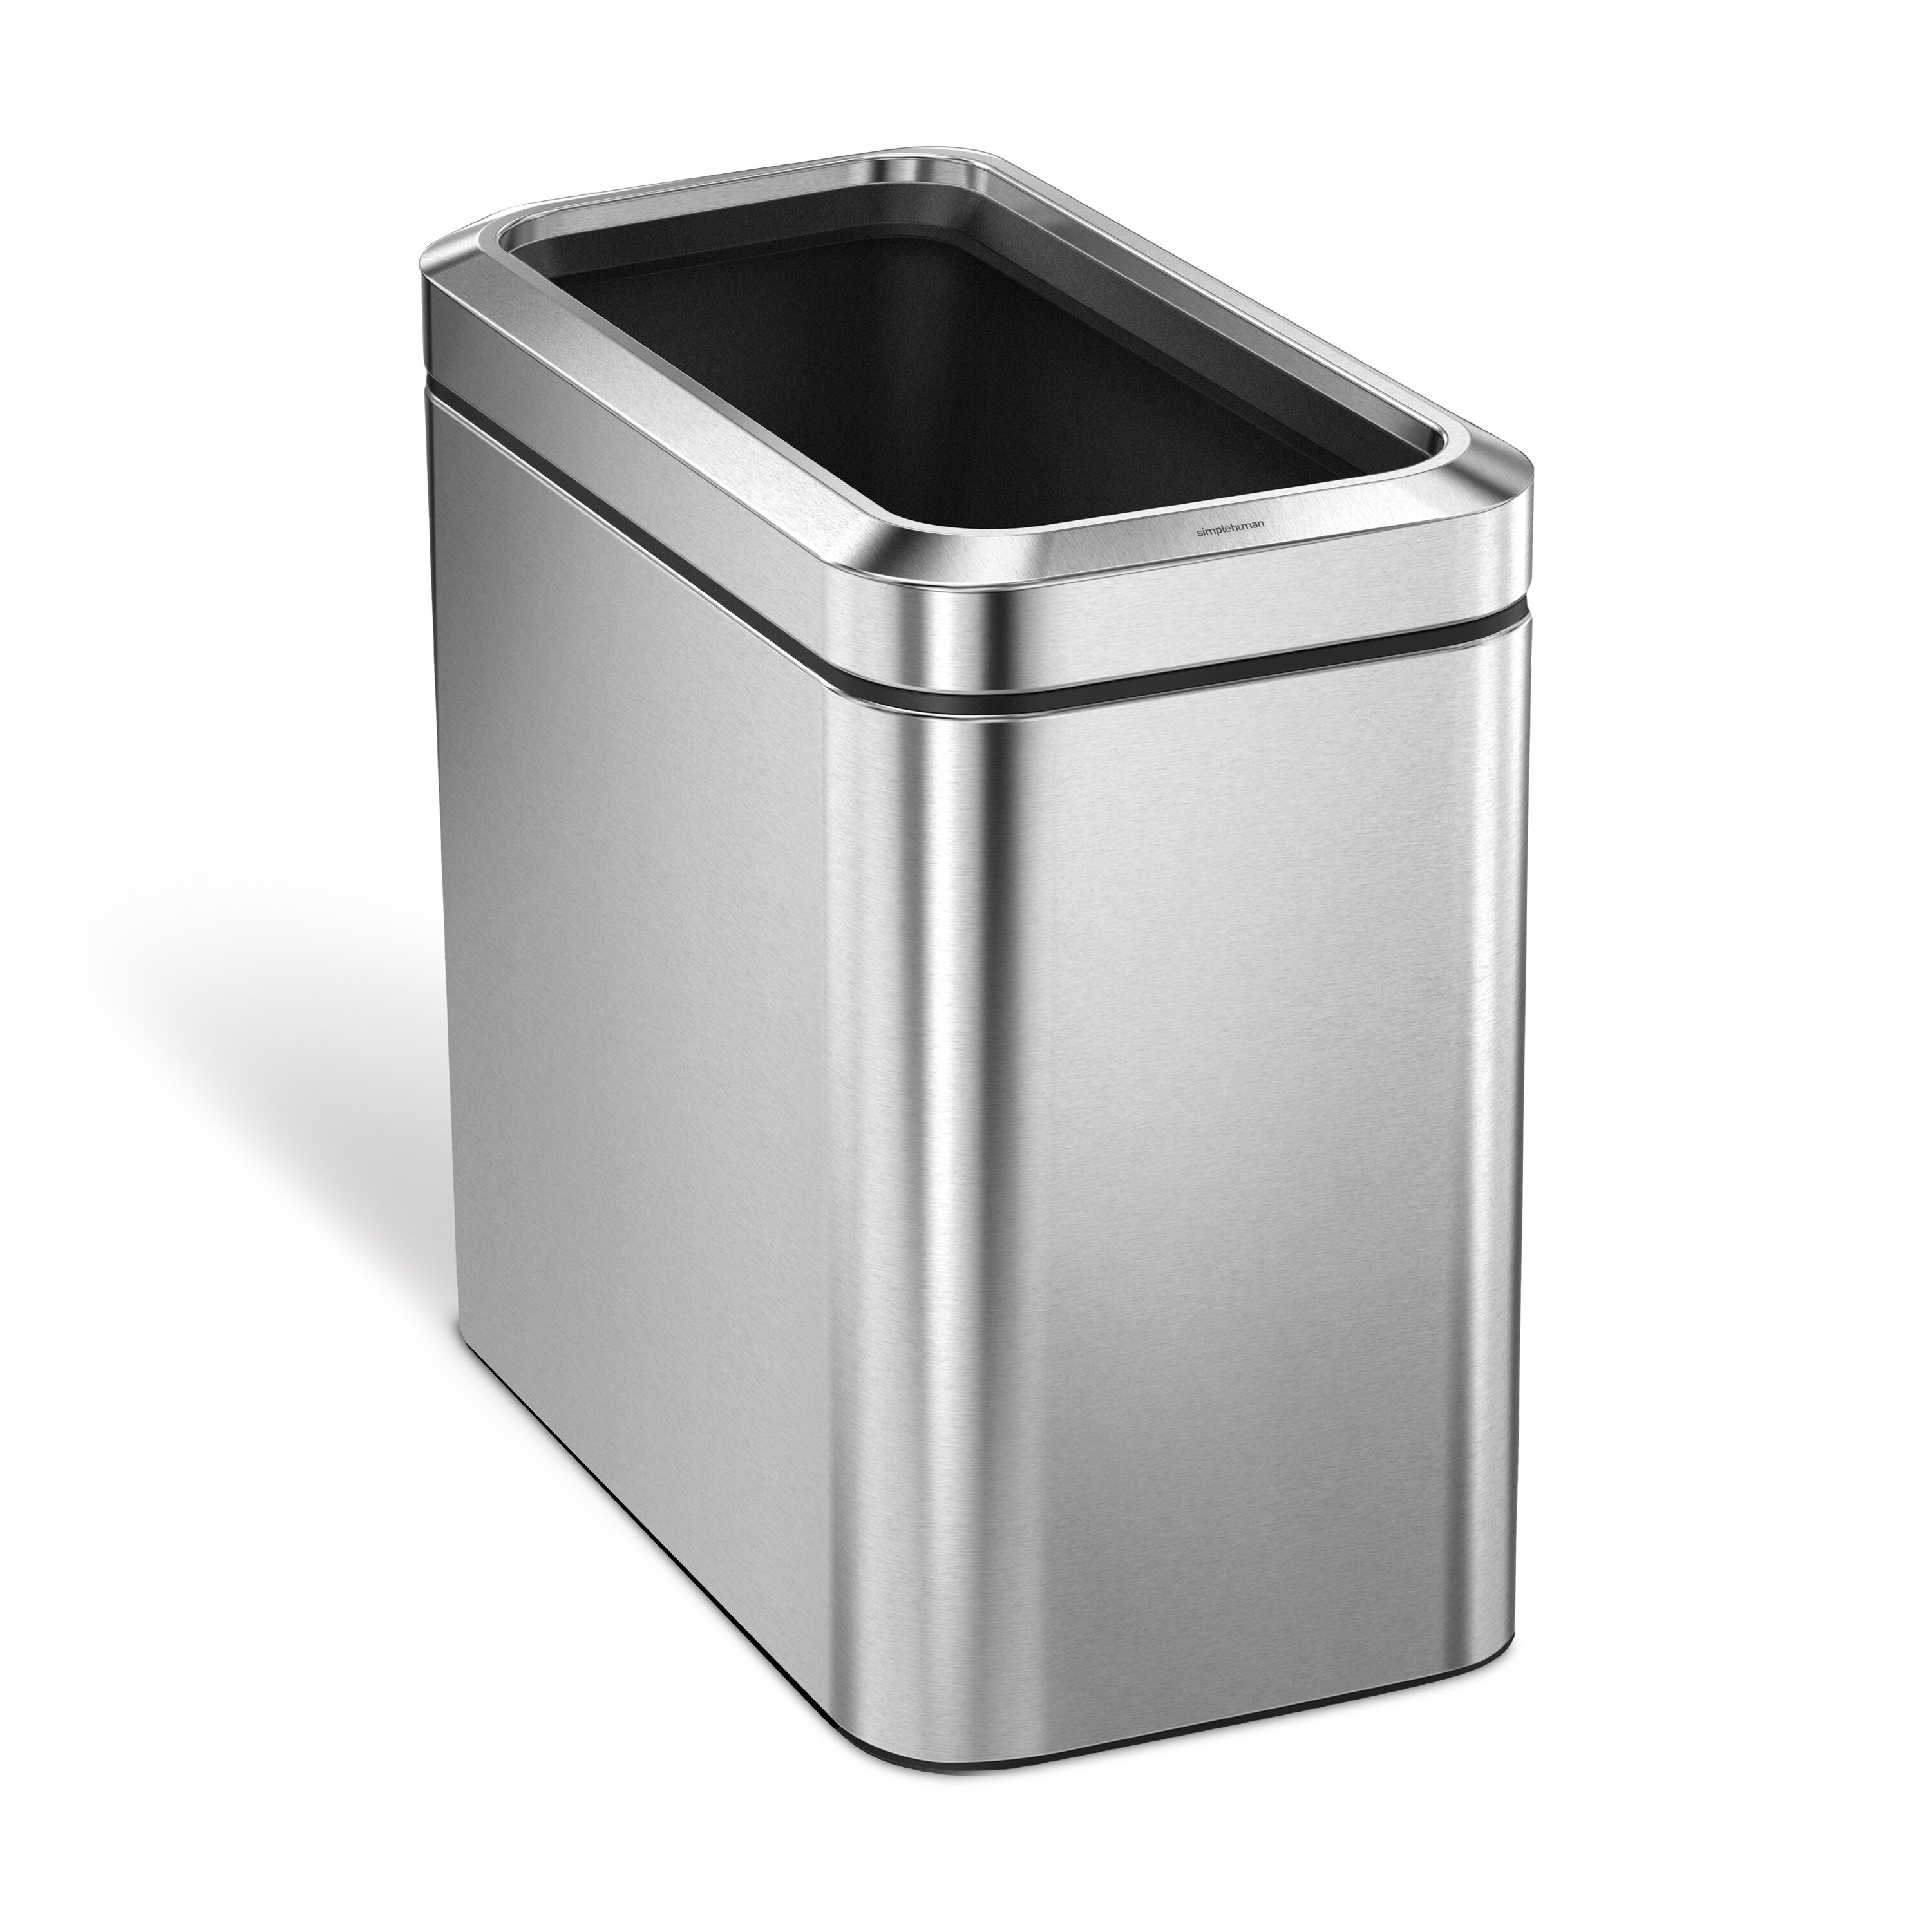 Is the Simplehuman Trash Can Worth It? Yes, and so Are Its Other Products